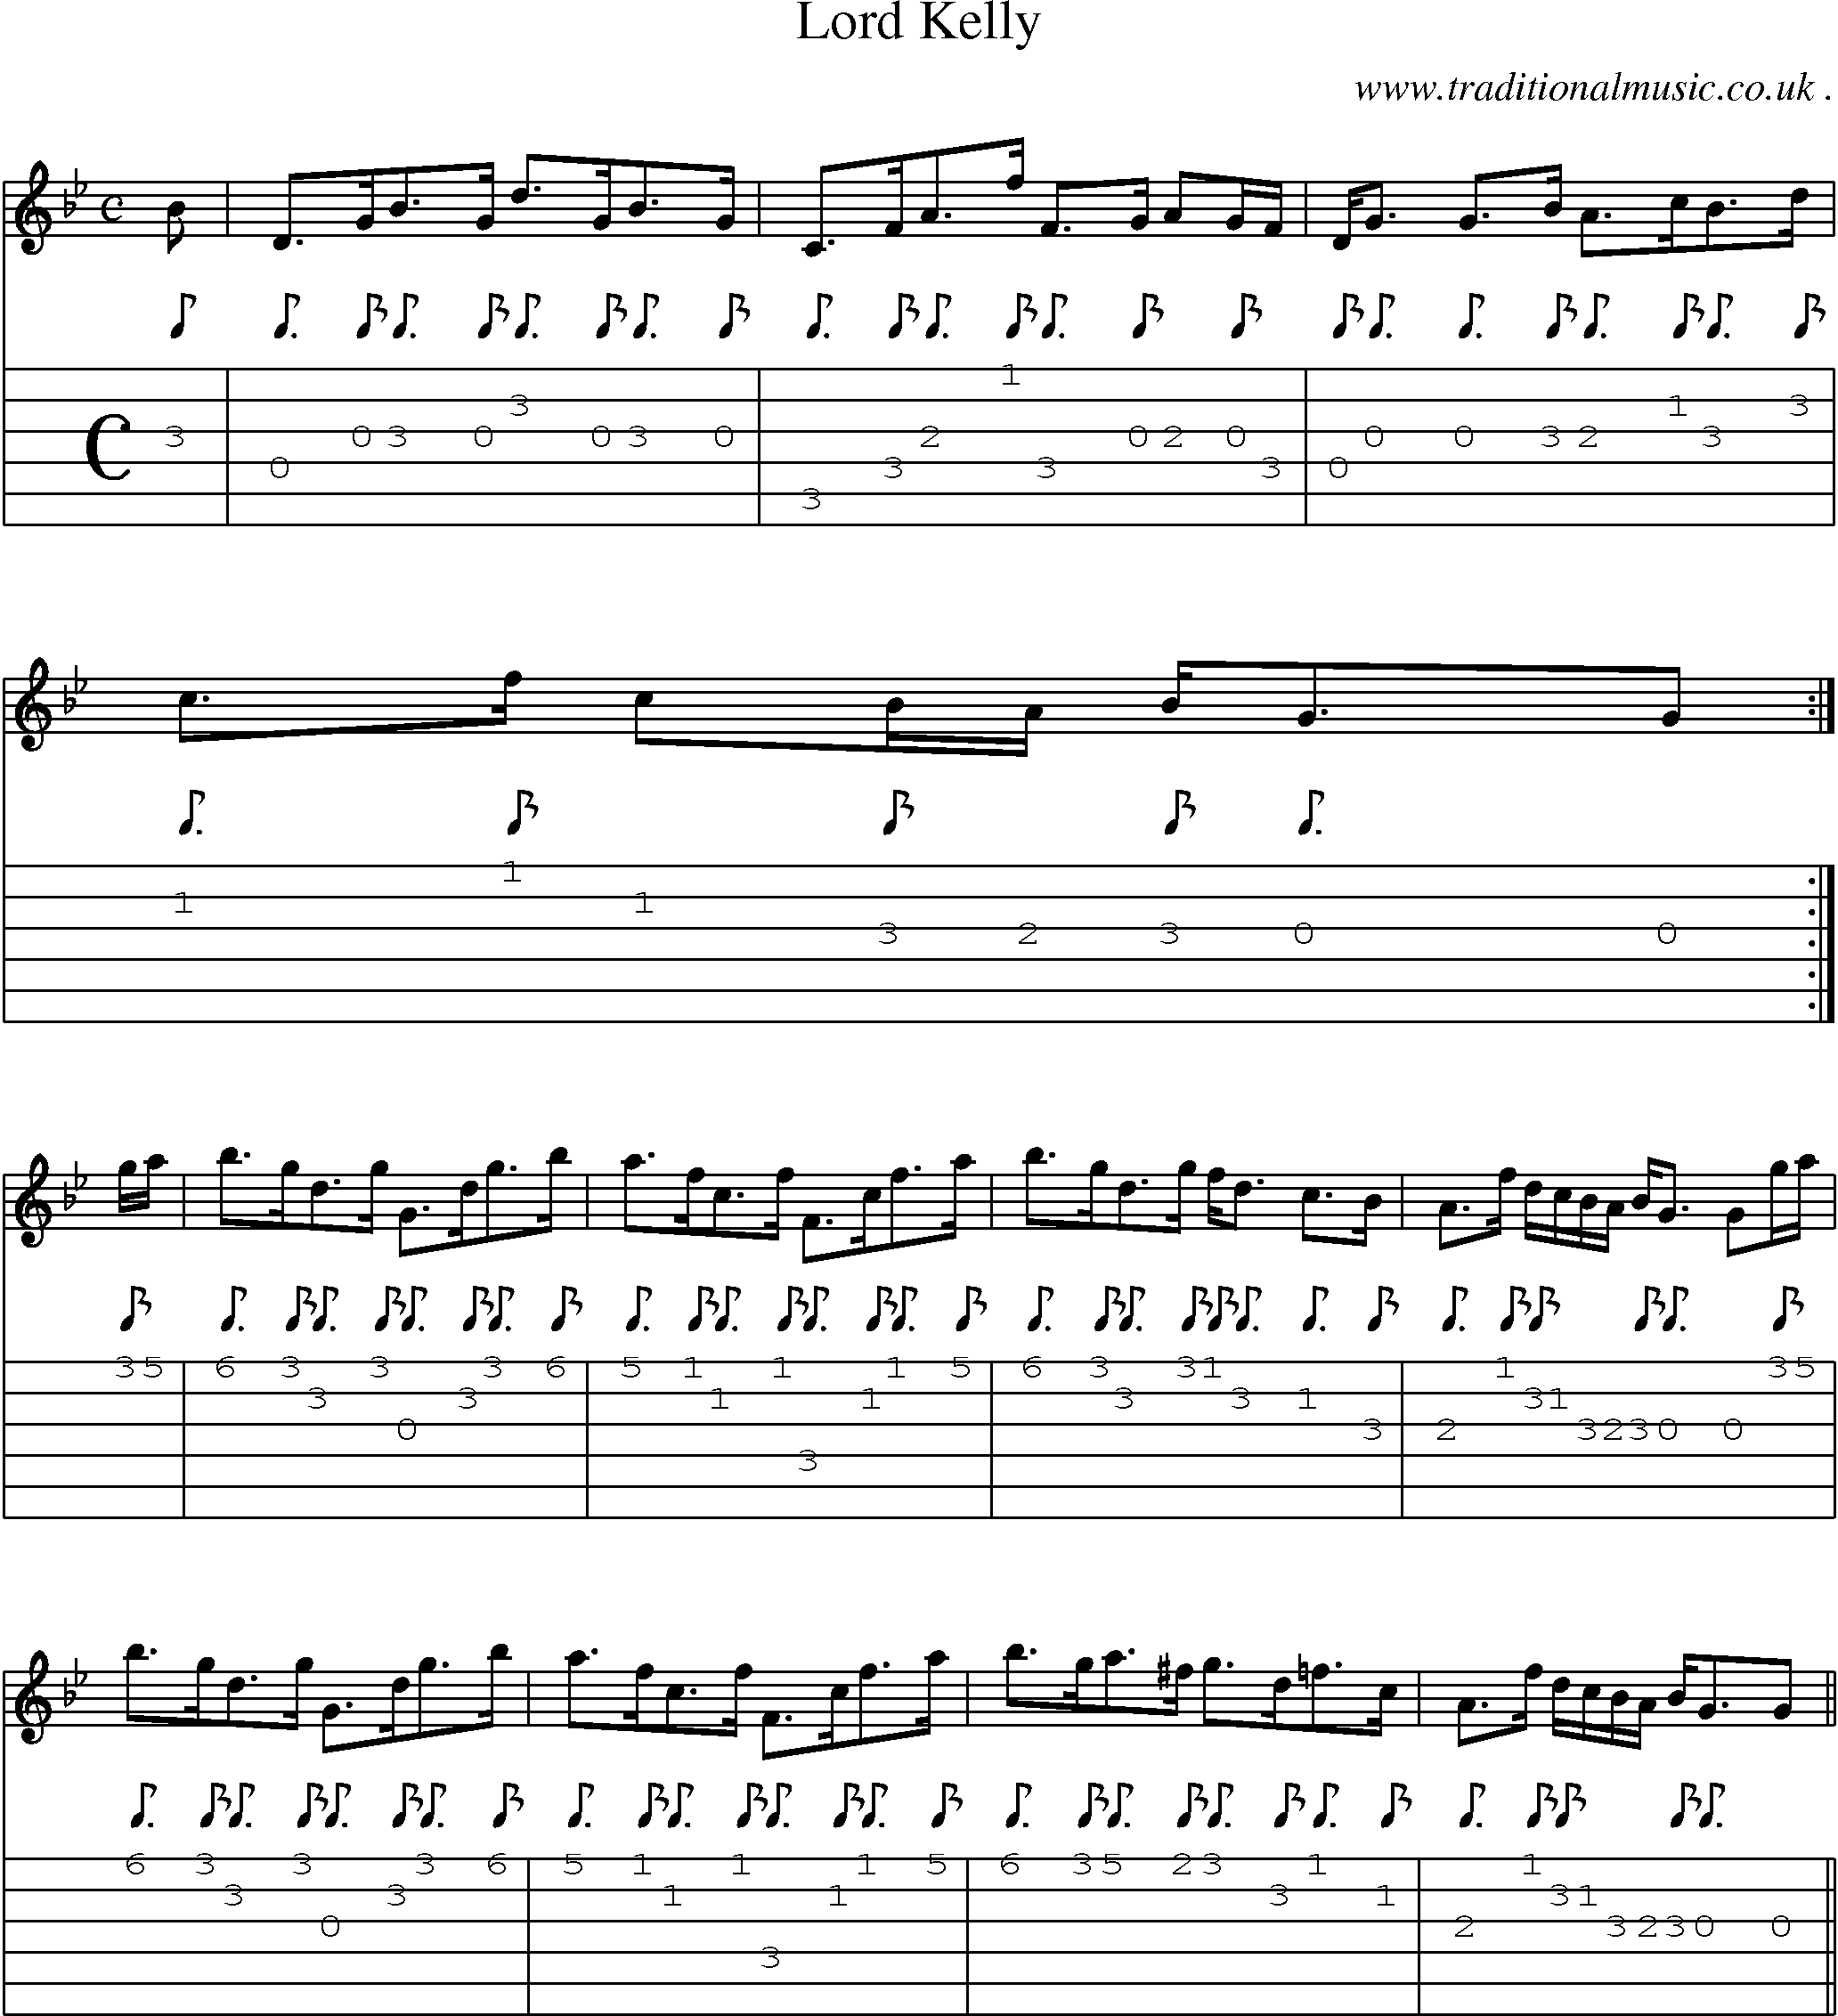 Sheet-music  score, Chords and Guitar Tabs for Lord Kelly